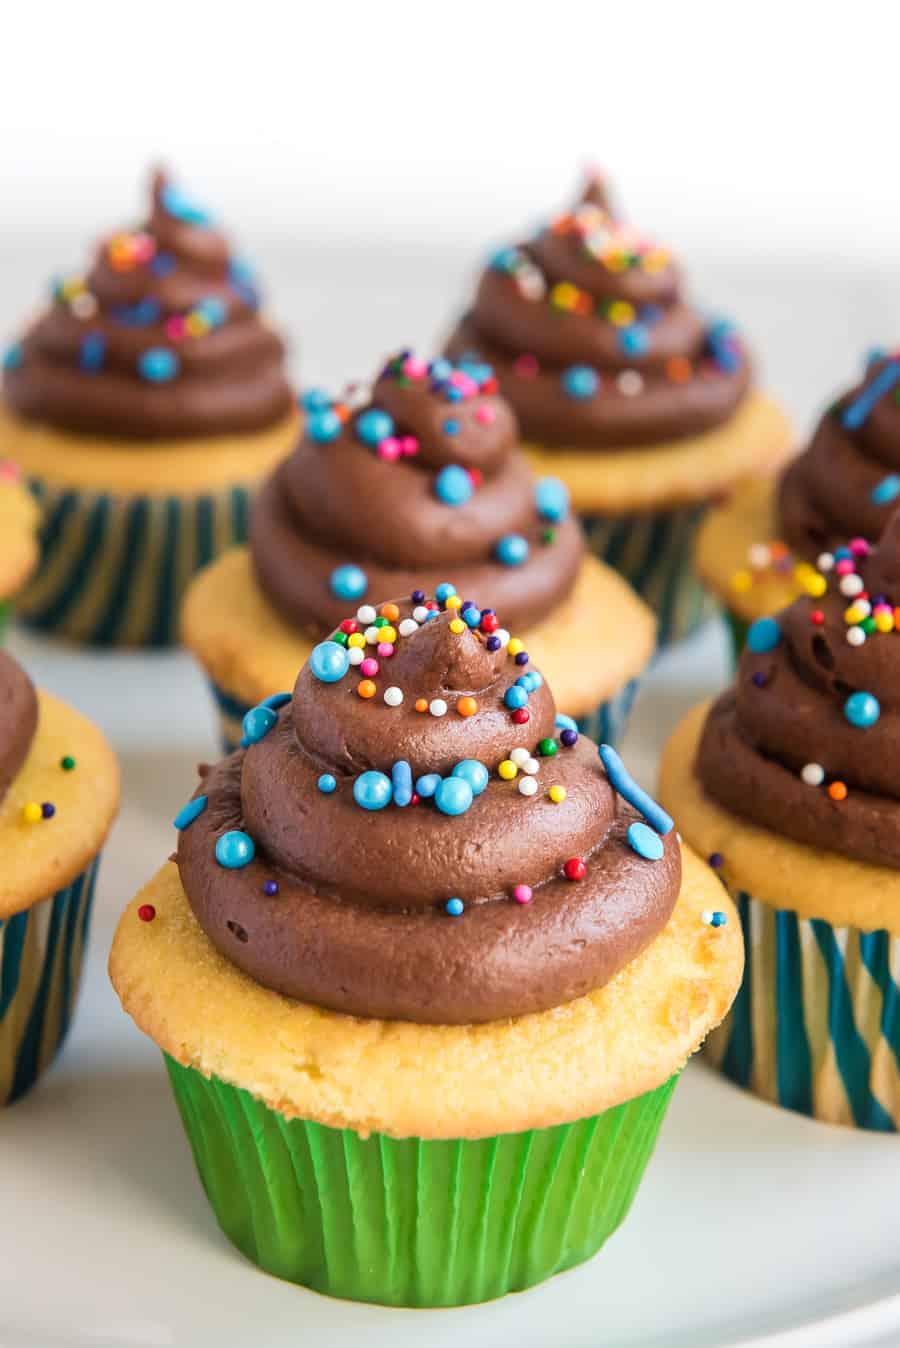 Vanilla cupcakes with chocolate buttercream frosting and rainbow sprinkles.